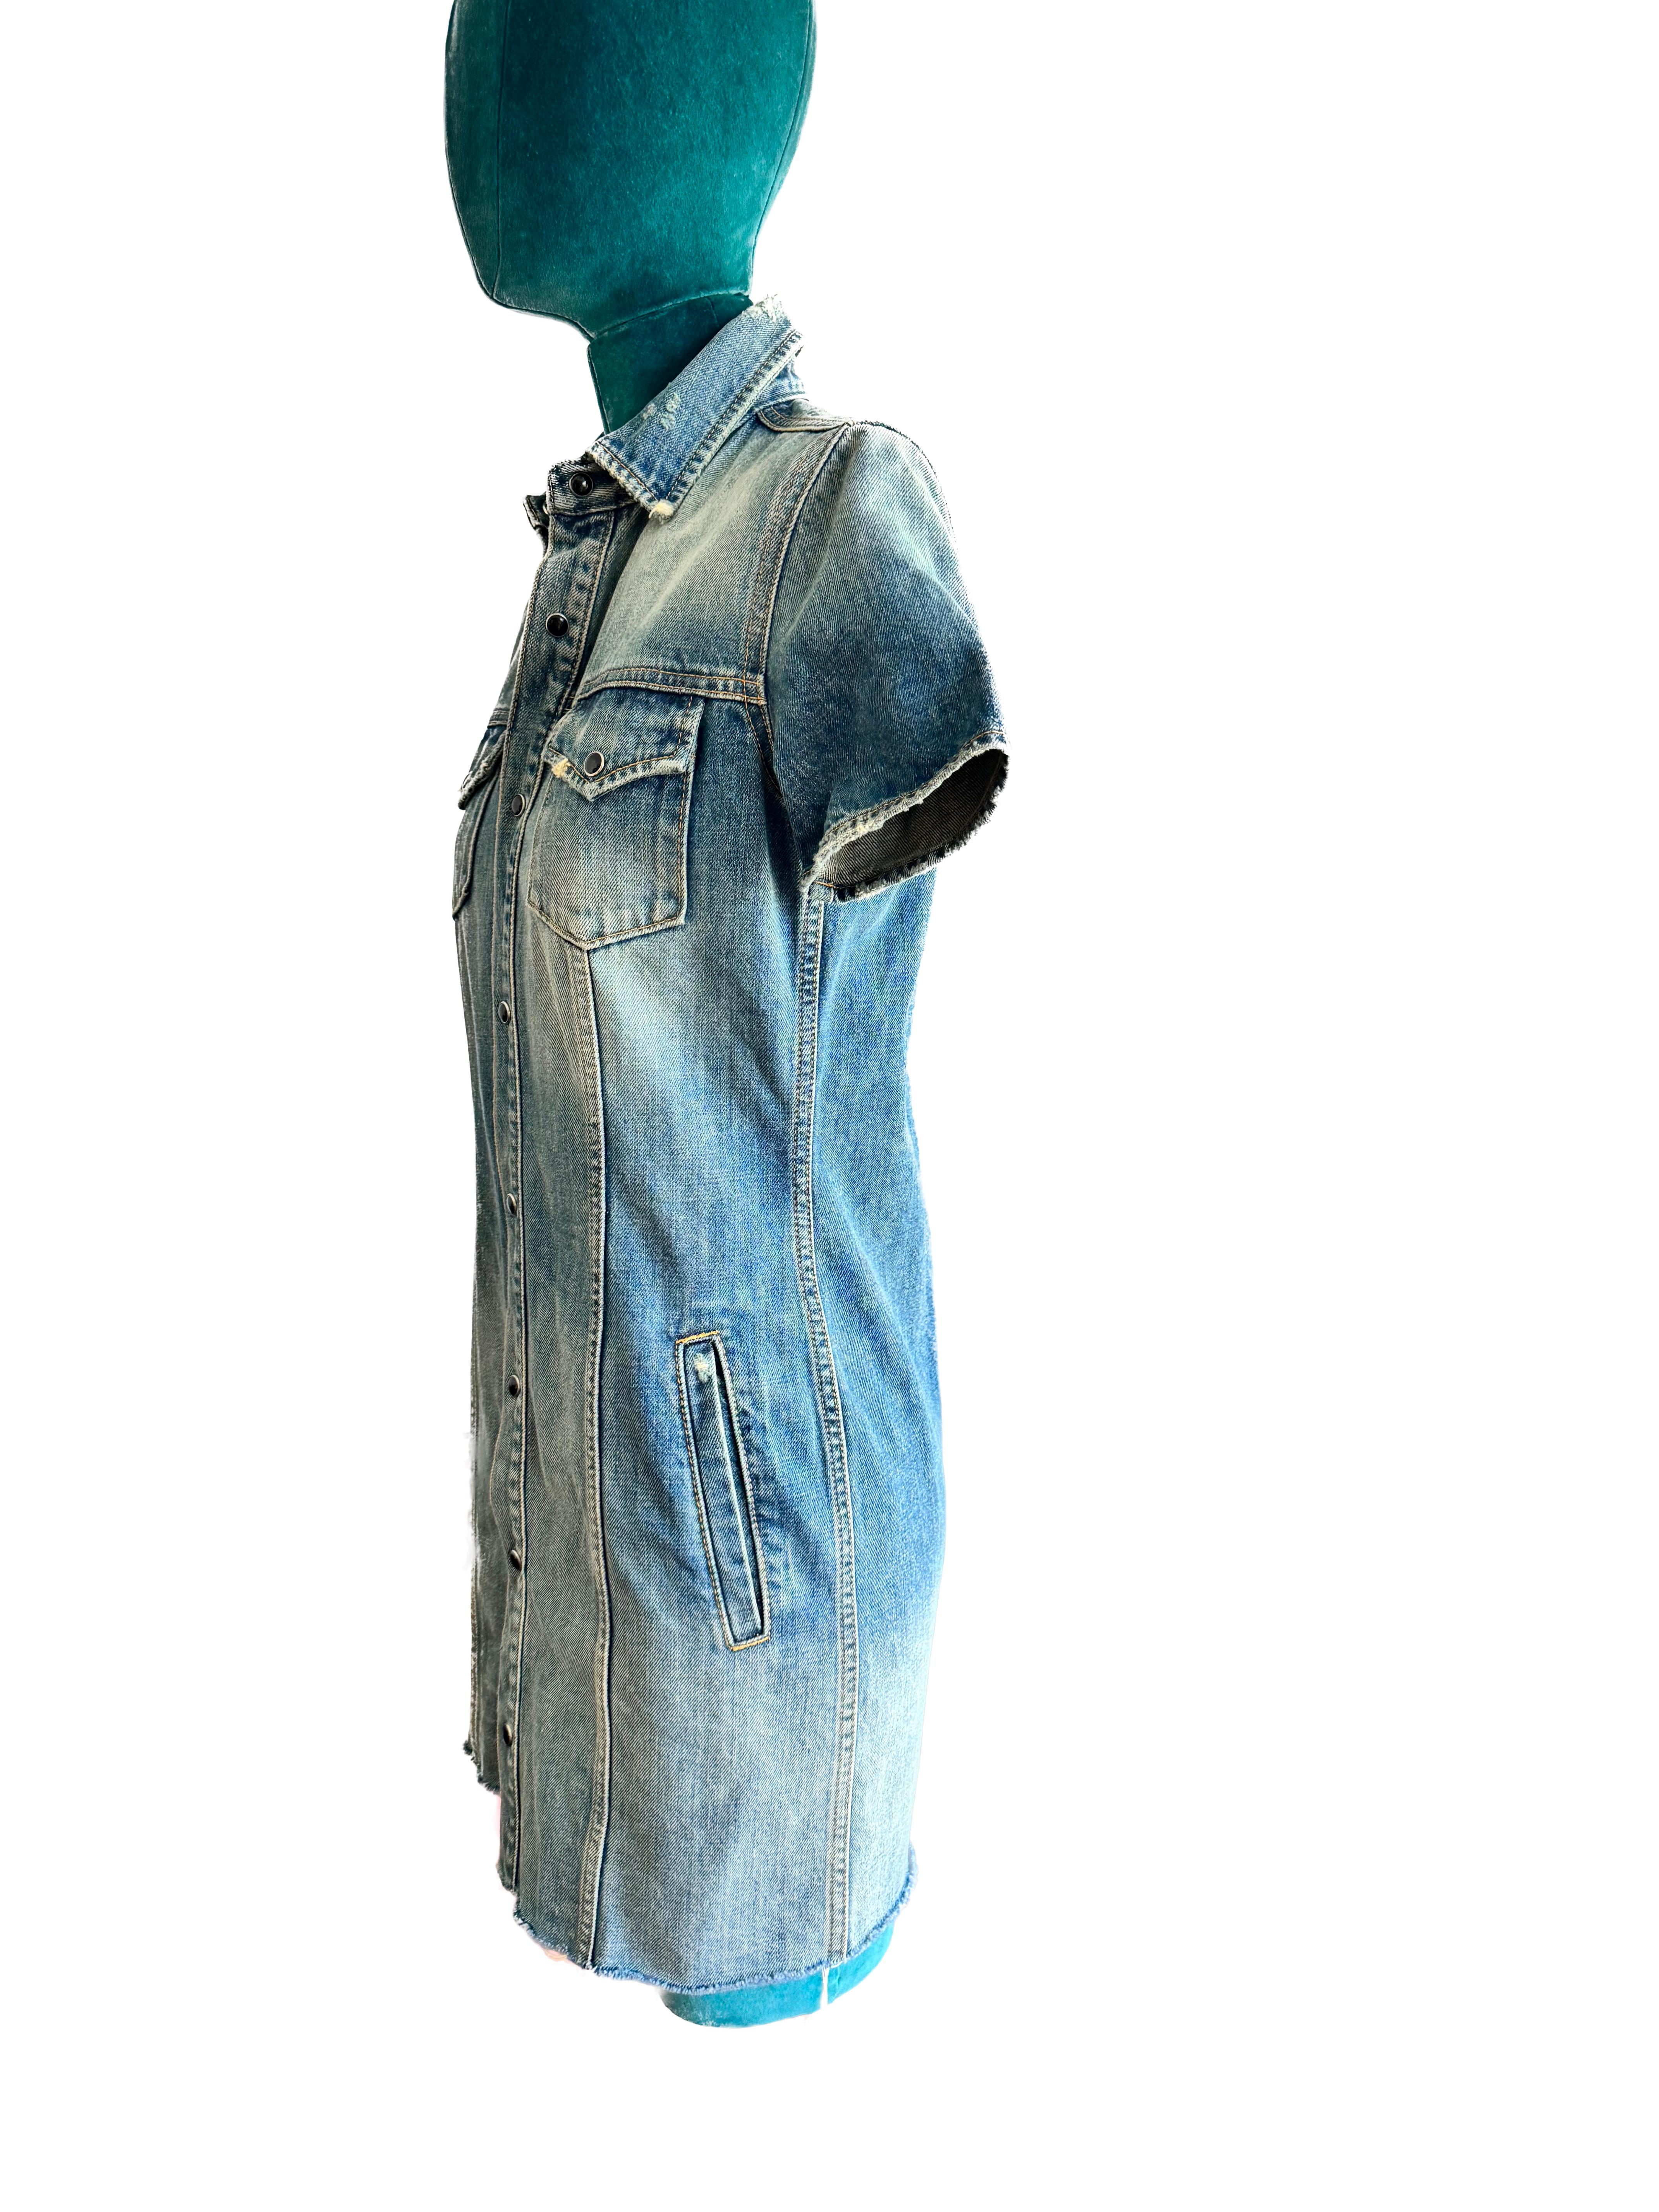 
ChatGPT
The Saint Laurent distressed denim shirt dress in size XS embodies a vintage-inspired yet contemporary aesthetic, offering a fusion of casual elegance and edgy detailing.

Crafted from high-quality distressed denim fabric, this shirt dress